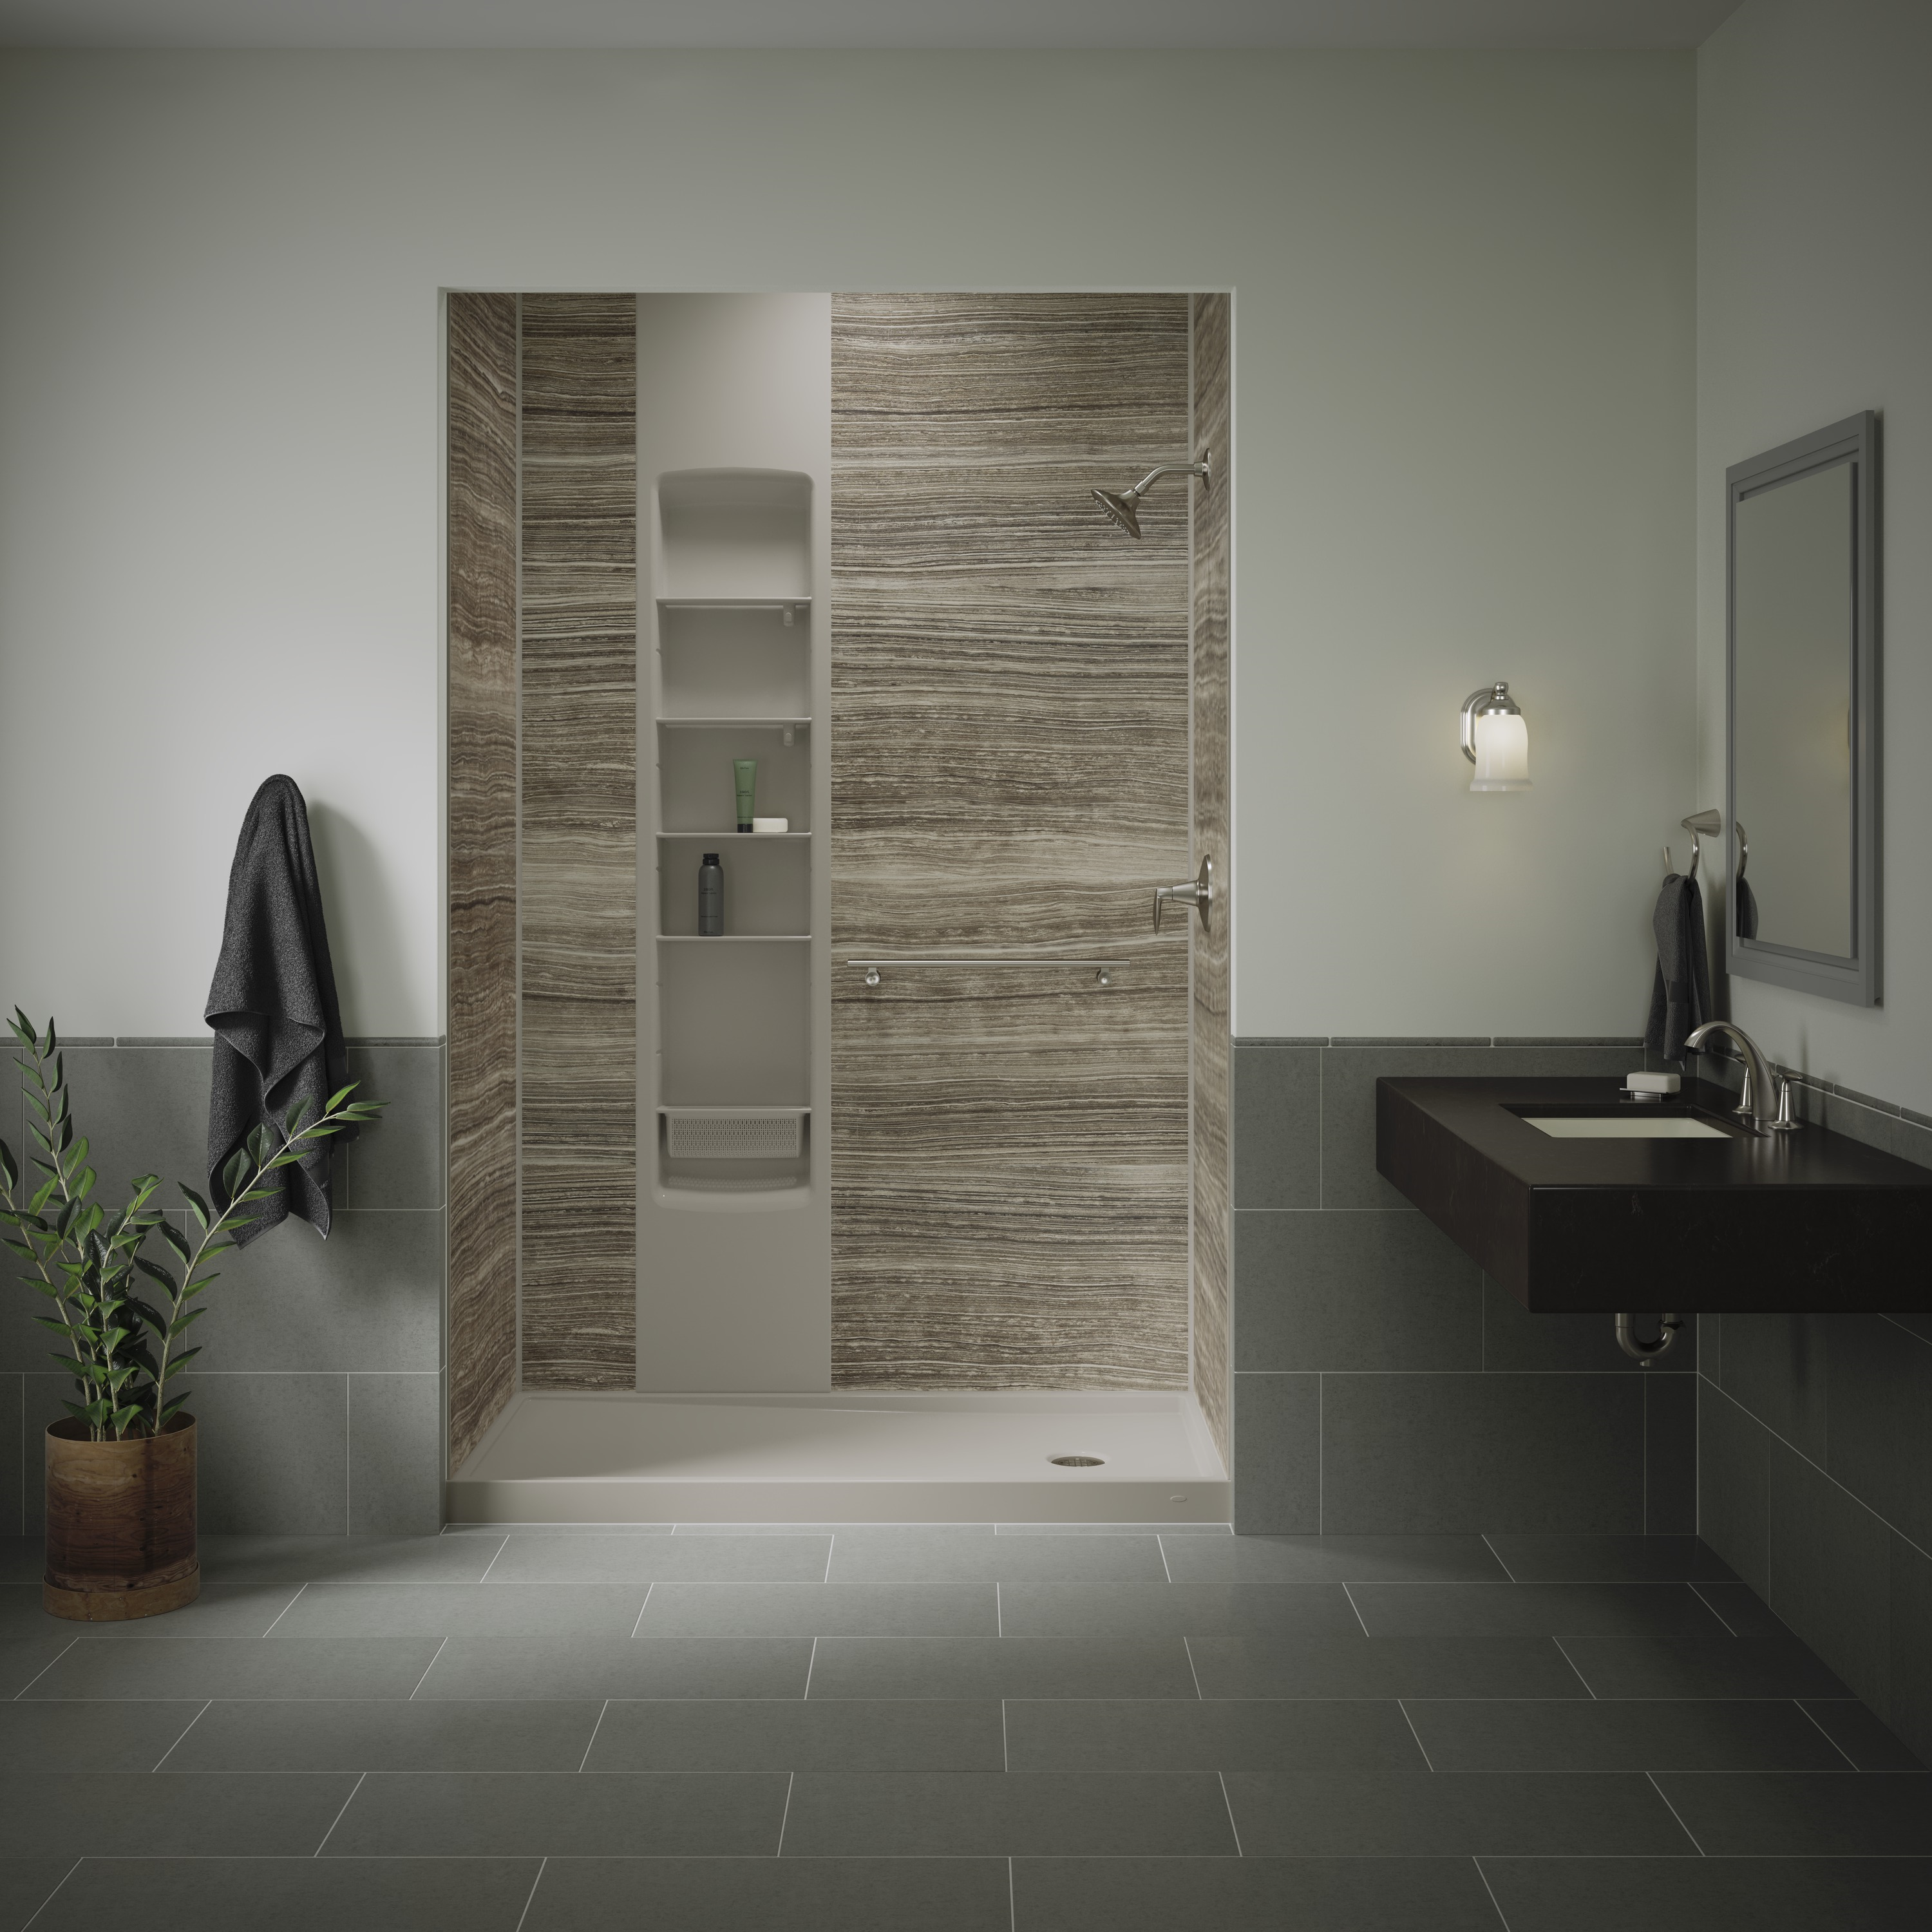 http://content.king5.com/photo/2018/01/09/Pacific%20Bath%200108%20walk%20in%20shower%20in%20bathroom_1515514706198.png_12331020_ver1.0.jpg